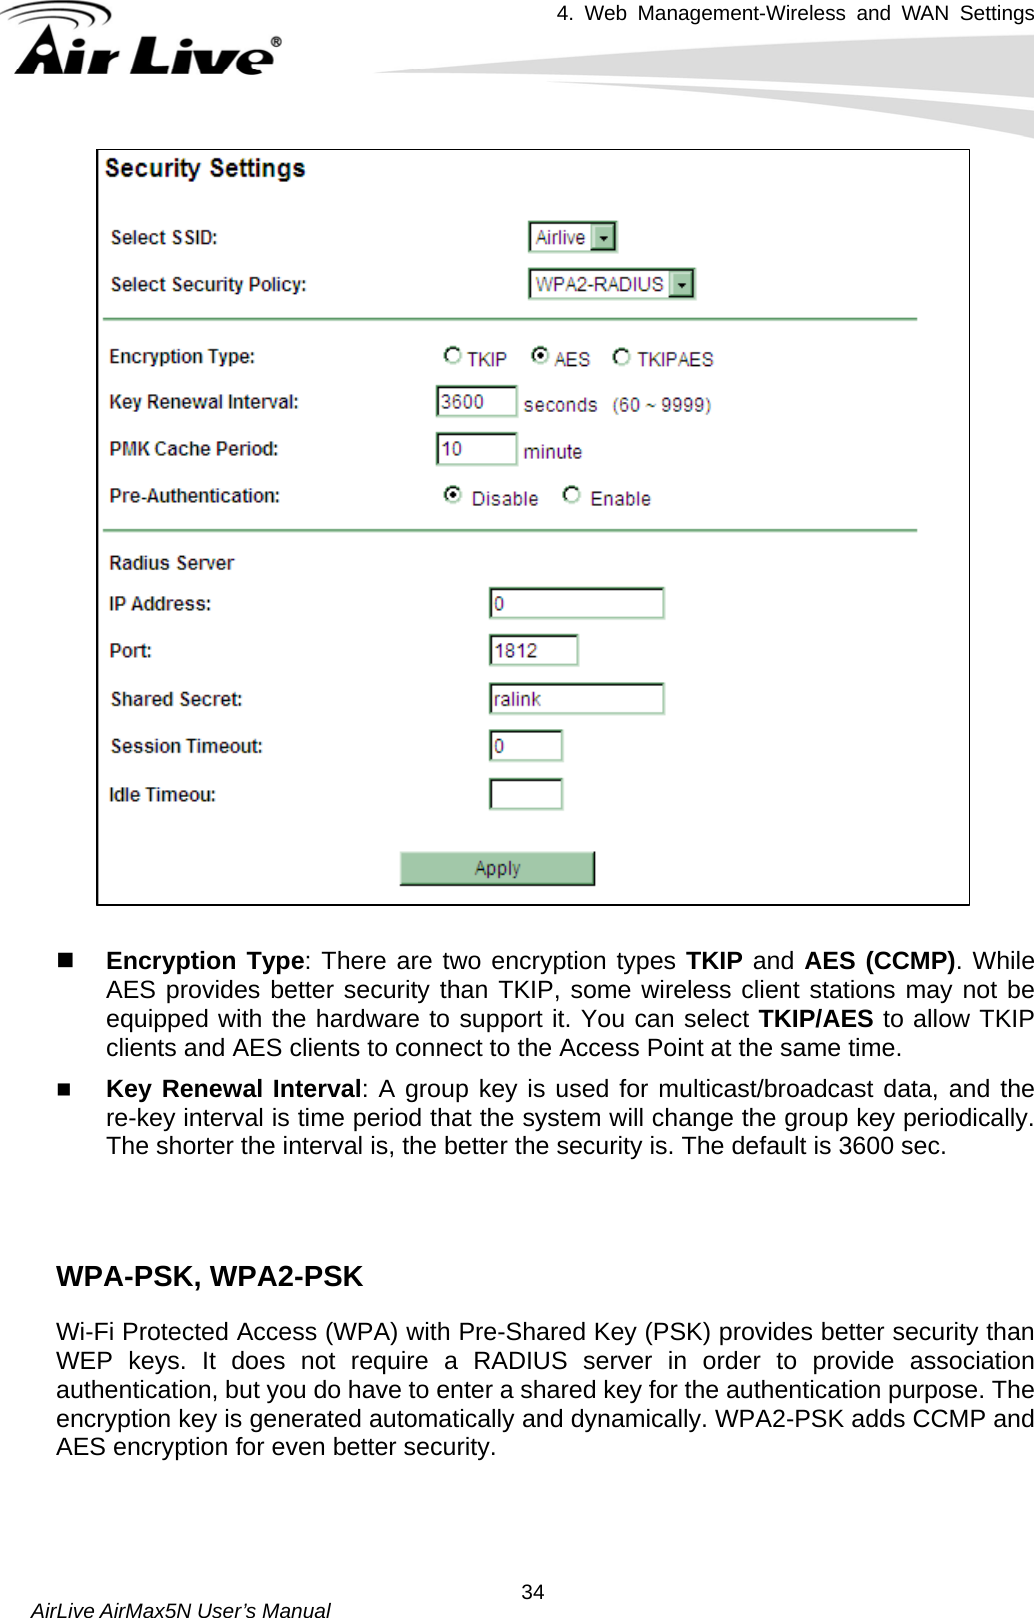 4. Web Management-Wireless and WAN Settings   AirLive AirMax5N User’s Manual  34  Encryption Type: There are two encryption types TKIP and AES (CCMP). While AES provides better security than TKIP, some wireless client stations may not be equipped with the hardware to support it. You can select TKIP/AES to allow TKIP clients and AES clients to connect to the Access Point at the same time.    Key Renewal Interval: A group key is used for multicast/broadcast data, and the re-key interval is time period that the system will change the group key periodically. The shorter the interval is, the better the security is. The default is 3600 sec.    WPA-PSK, WPA2-PSK Wi-Fi Protected Access (WPA) with Pre-Shared Key (PSK) provides better security than WEP keys. It does not require a RADIUS server in order to provide association authentication, but you do have to enter a shared key for the authentication purpose. The encryption key is generated automatically and dynamically. WPA2-PSK adds CCMP and AES encryption for even better security.    